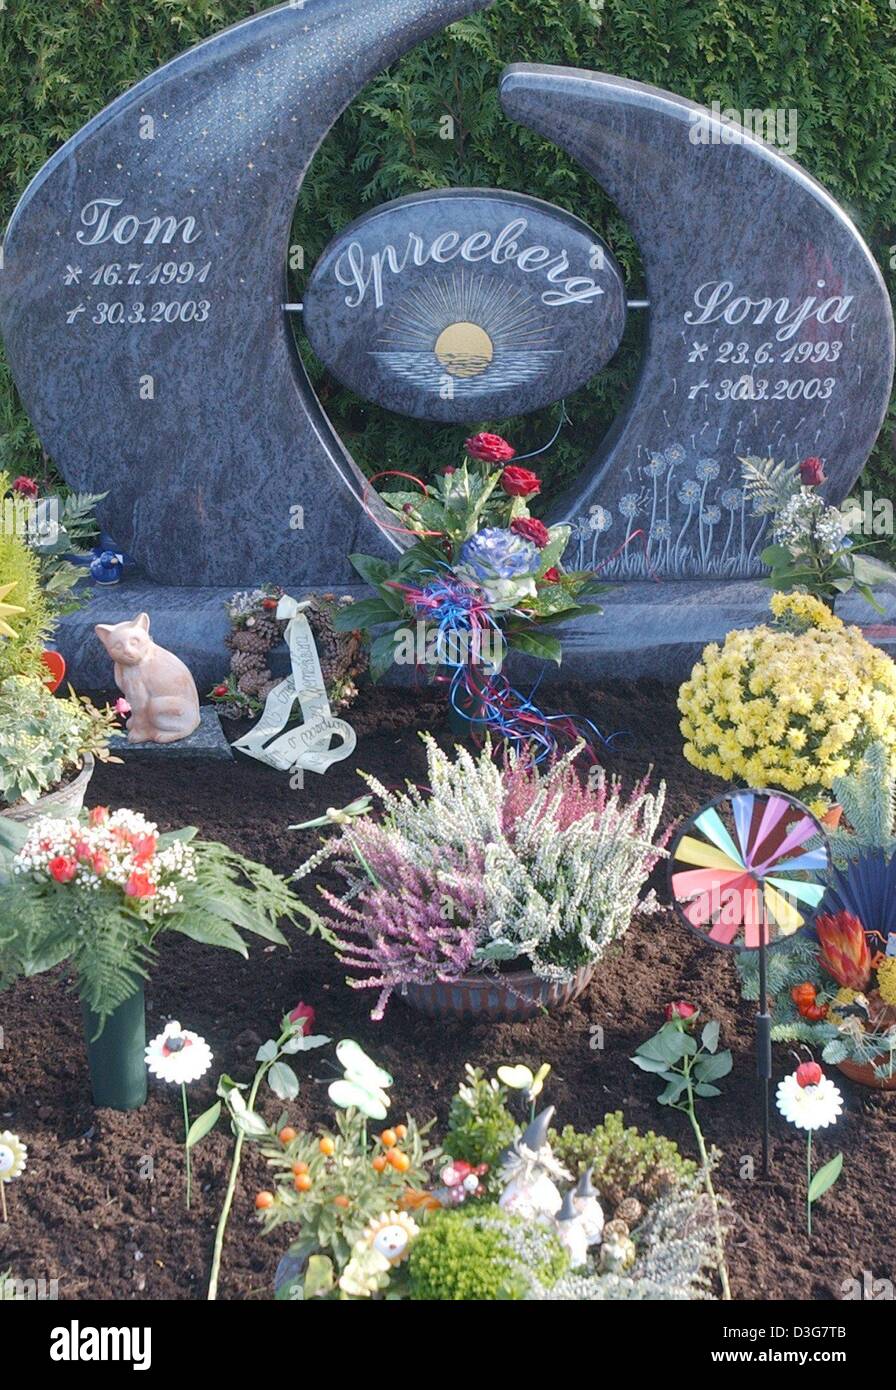 dpa) - A view of the grave of the two murdered children Tom and Sonja in  Eschweiler, western Germany, 29 October 2003. The two 28 and 33 year old  murder suspects will